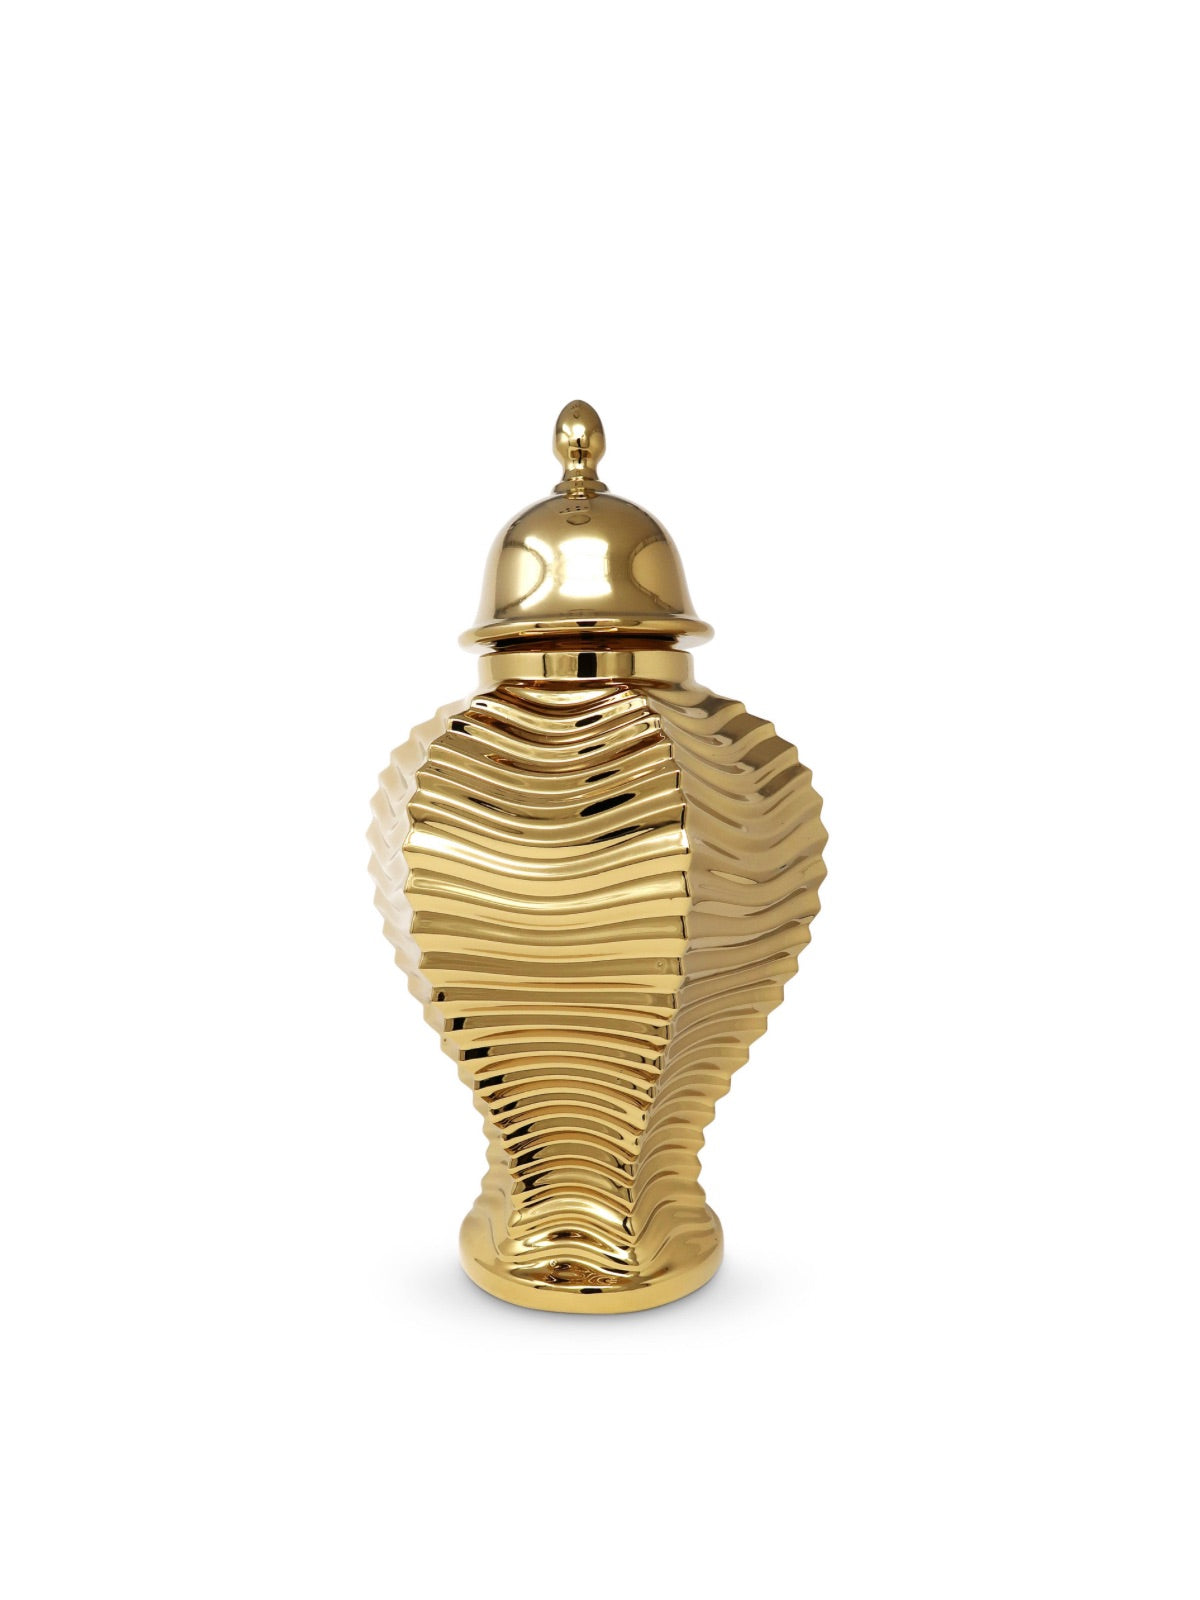 Gold Ceramic Ginger Jar with Ripple Design in Size Small, Sold by KYA Home Decor.